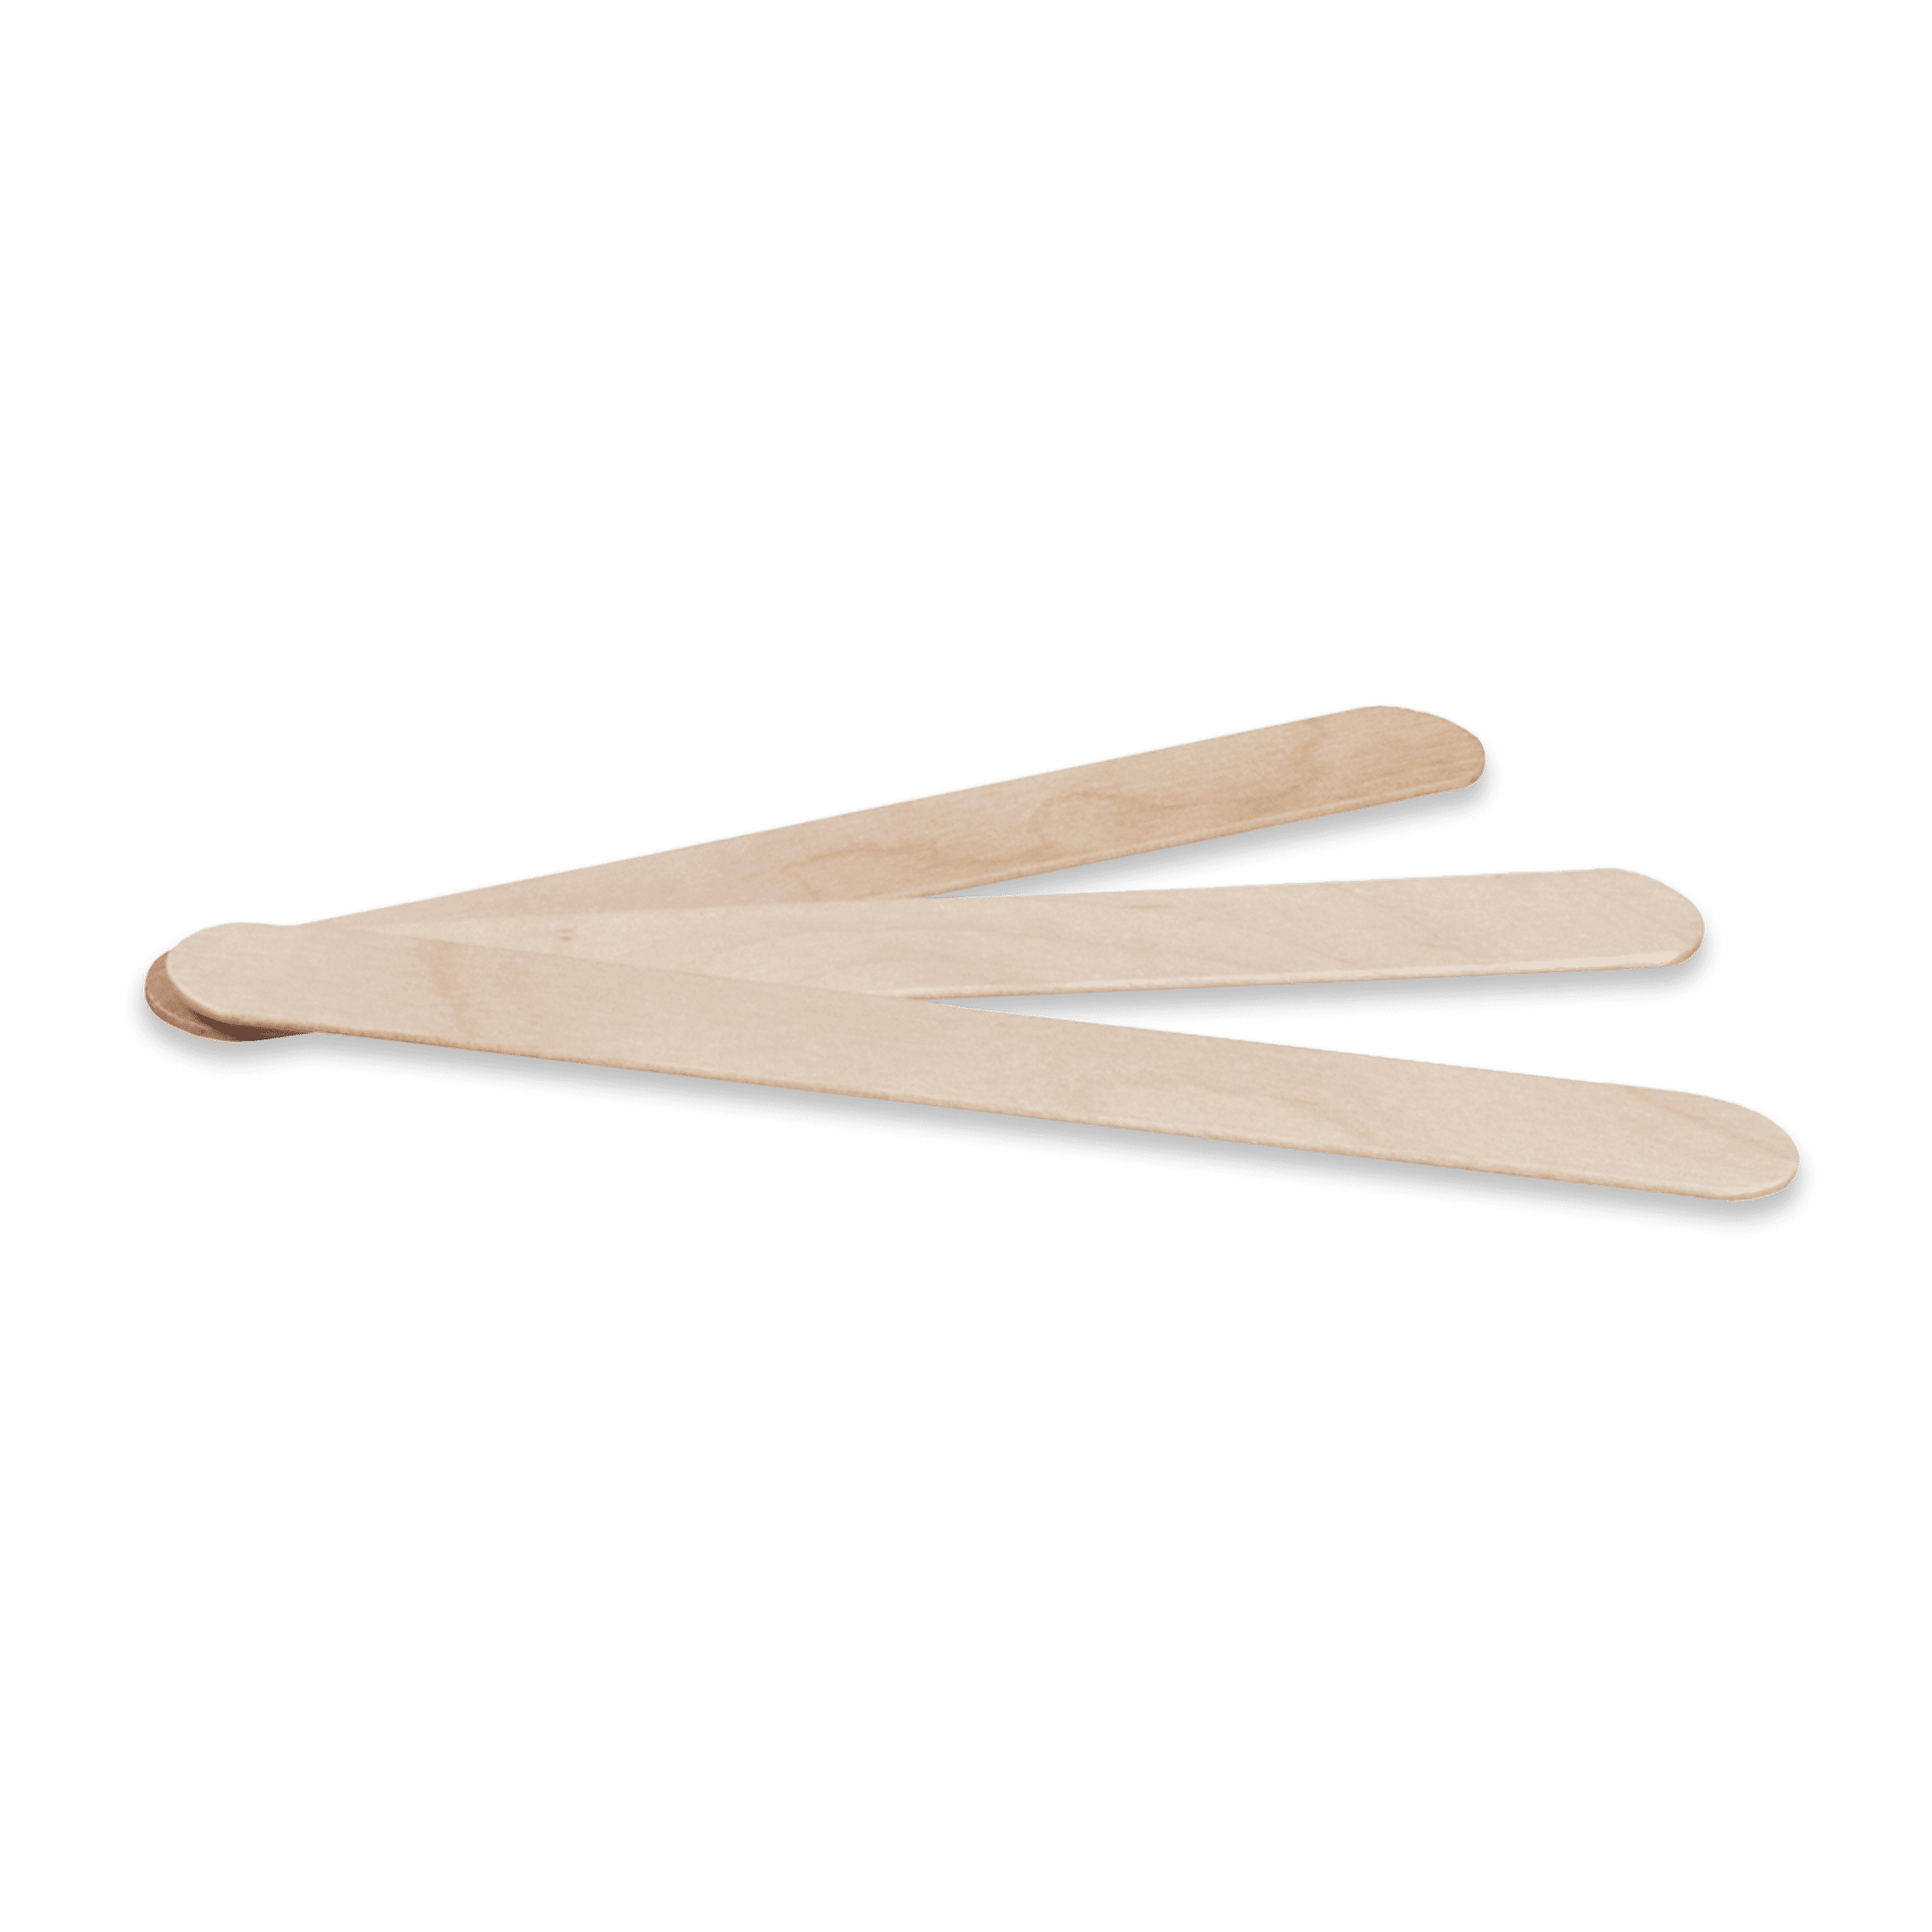 First Aid Only Dynarex Tongue Depressors Wood, Senior 6, Non-Sterile,  Precision Cut • Price »